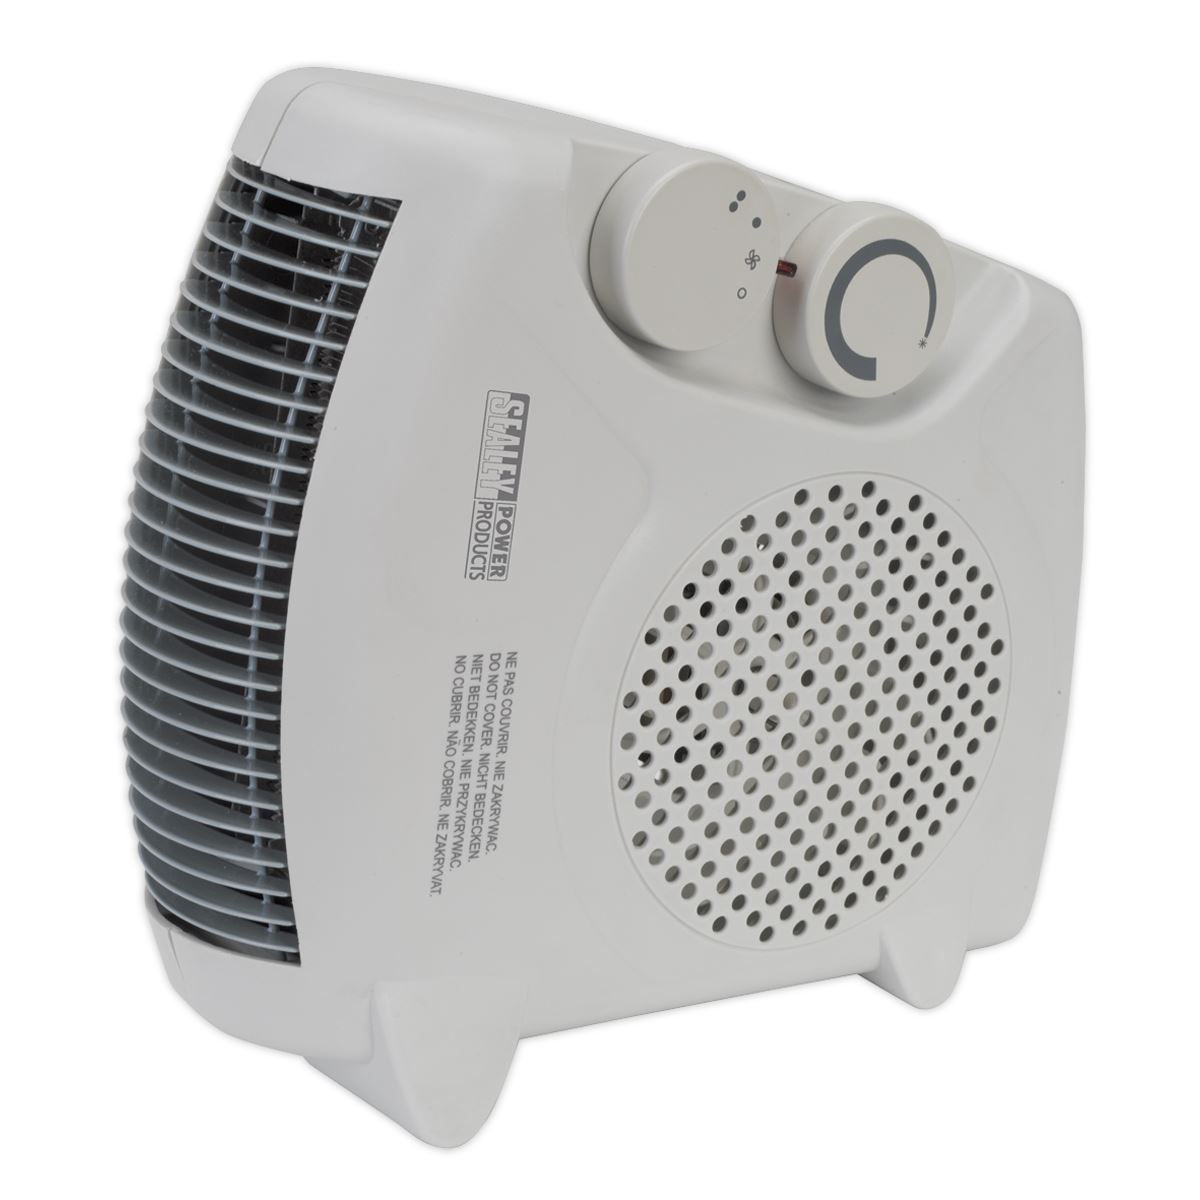 Details About Sealey Fh2010 Fan Heater 2000w230v 2 Heat Settings Thermostat pertaining to dimensions 1200 X 1200